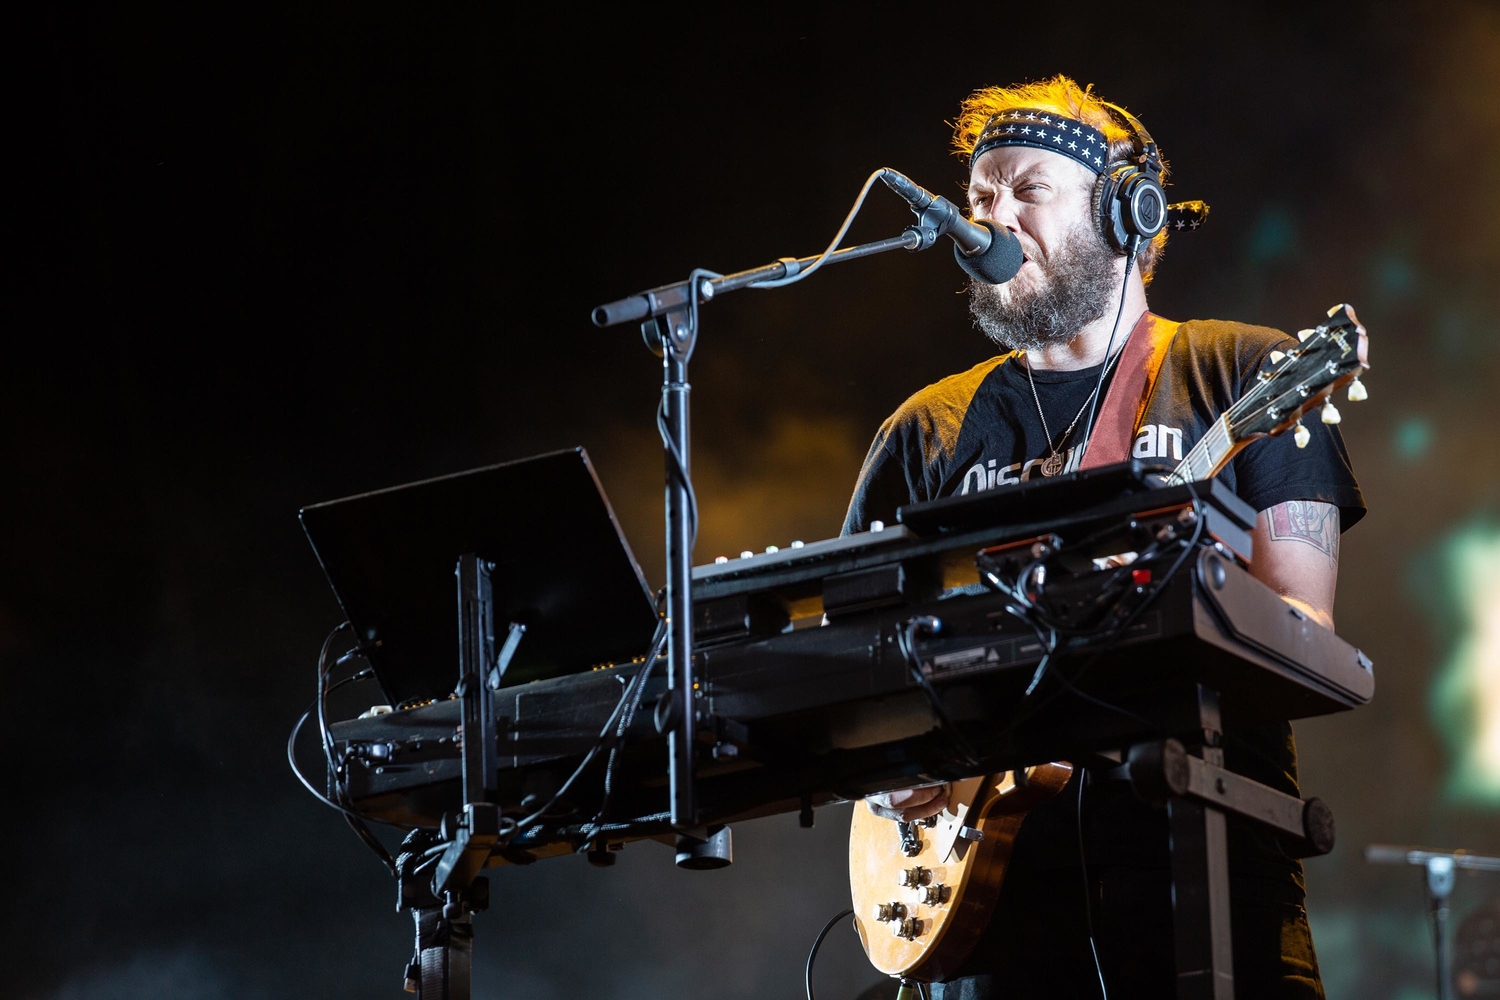 Bon Iver brings All Points East 2019 to a delicate but grandiose close